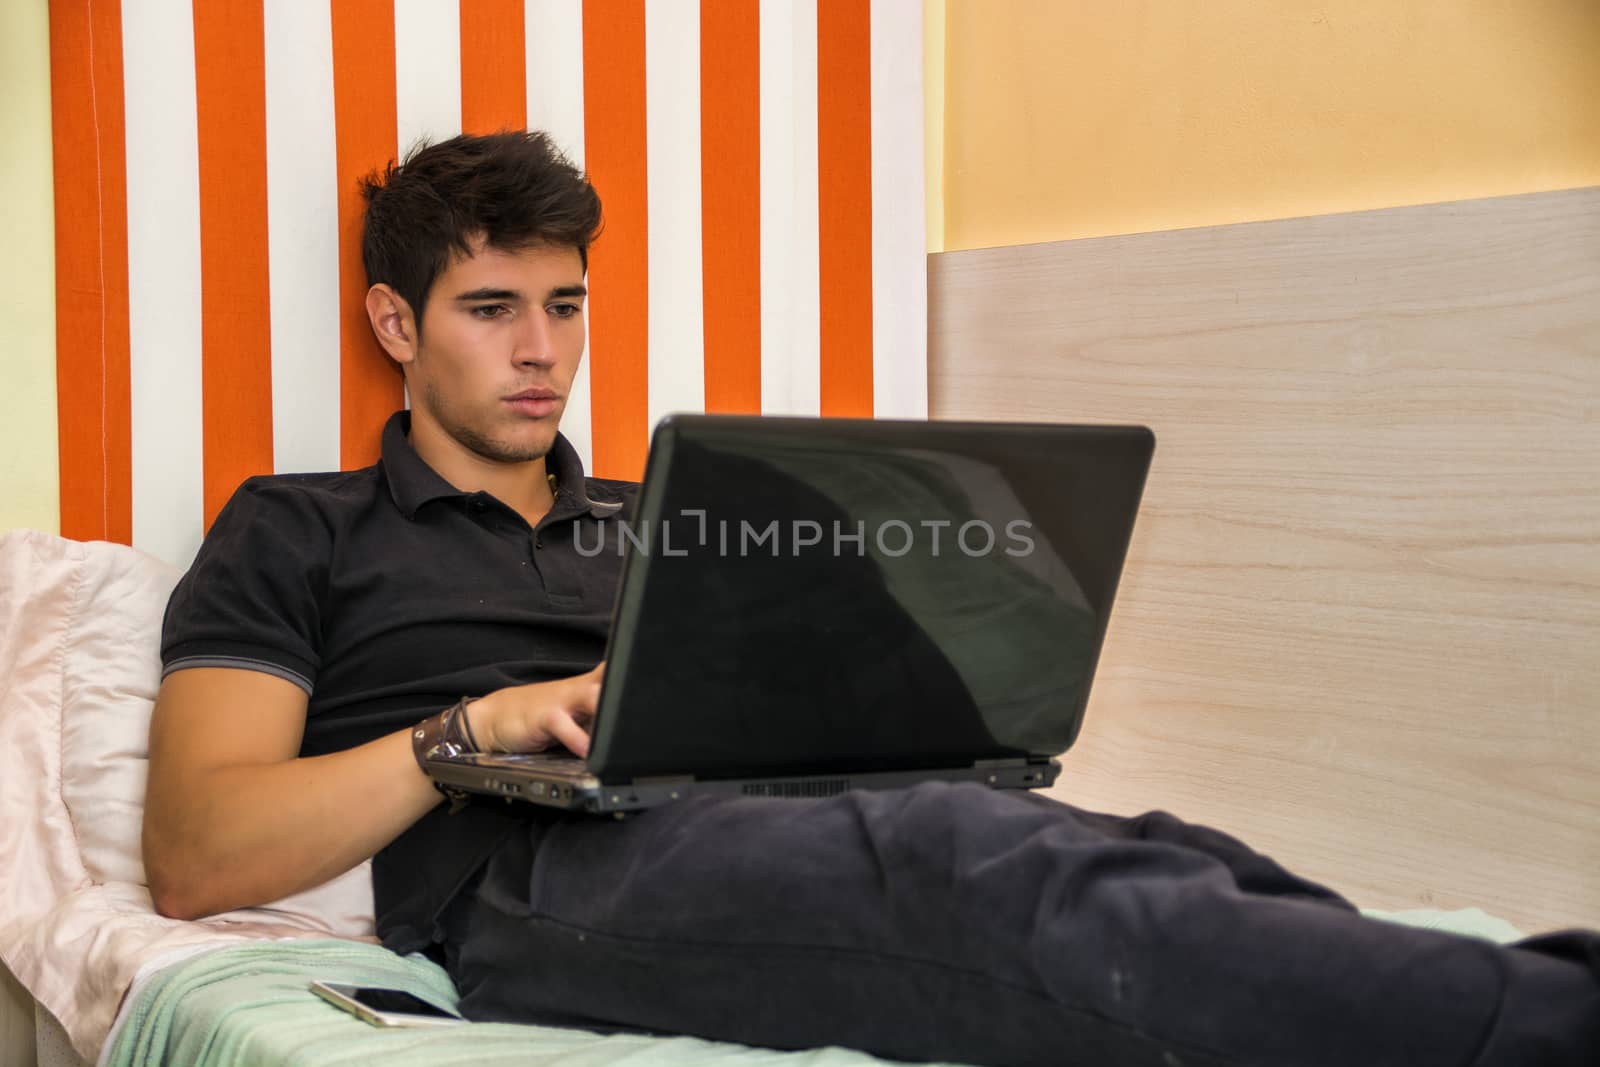 Young Man Doing Homework on Laptop in Bedroom by artofphoto